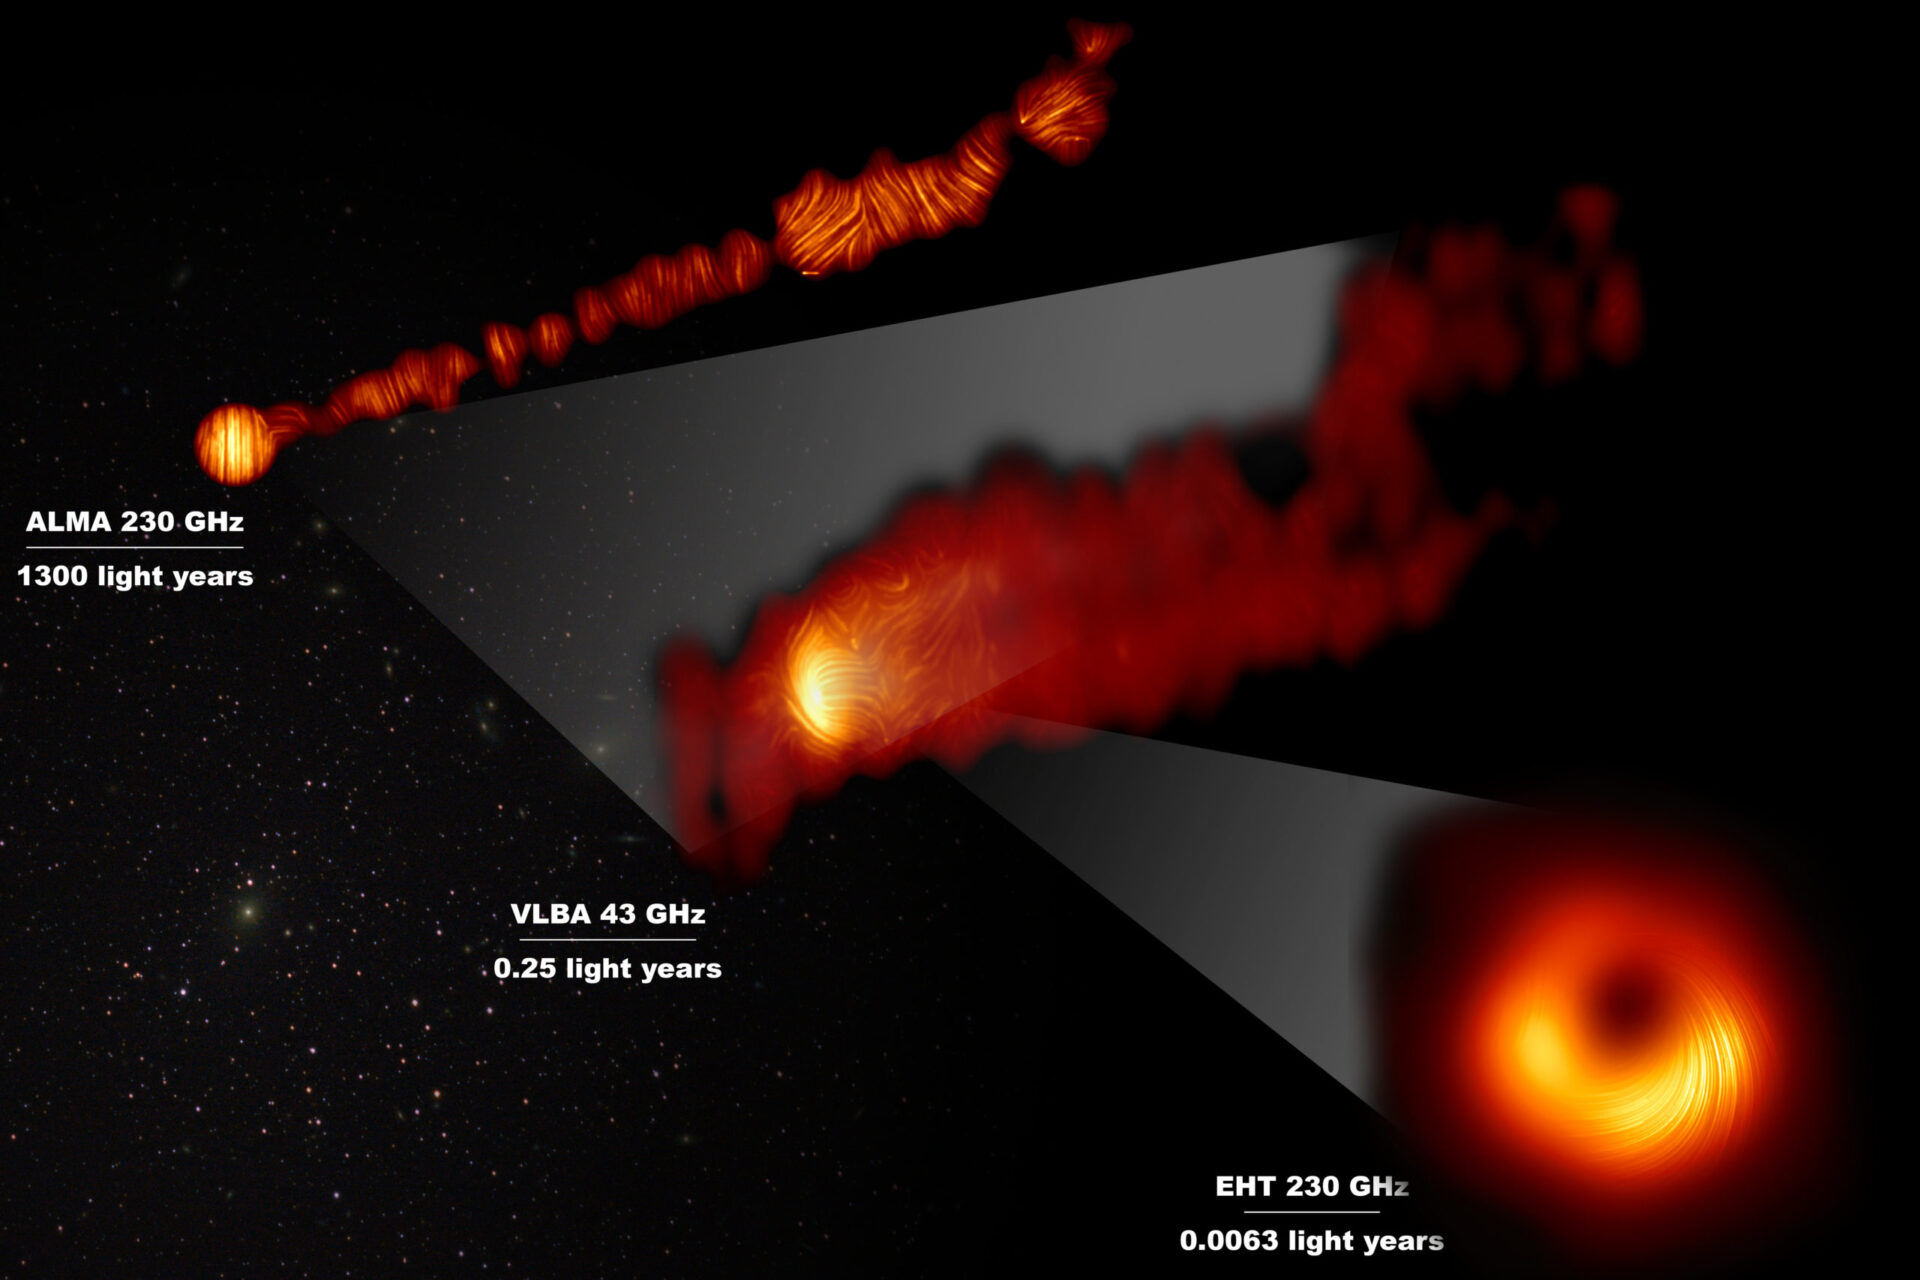 <p>This composite image shows three views of the central region of the Messier 87 (M87) galaxy in polarised light. The galaxy has a supermassive black hole at its centre and is famous for its jets, that extend far beyond the galaxy.   One of the polarised-light images, obtained with the Chile-based Atacama Large Millimeter/submillimeter Array (ALMA), in which ESO is a partner, shows part of the jet in polarised light. This image captures the part of the jet, with a size of 6000 light years, closer to the centre of the galaxy.  The other polarised light images zoom in closer to the supermassive black hole: the middle view covers a region about one light year in size and was obtained with the National Radio Astronomy Observatory’s Very Long Baseline Array (VLBA) in the US.   The most zoomed-in view was obtained by linking eight telescopes around the world to create a virtual Earth-sized telescope, the Event Horizon Telescope or EHT. This allows astronomers to see very close to the supermassive black hole, into the region where the jets are launched.   The lines mark the orientation of polarisation, which is related to the magnetic field in the regions imaged.The ALMA data provides a description of the magnetic field structure along the jet. Therefore the combined information from the EHT and ALMA allows astronomers to investigate the role of magnetic fields from the vicinity of the event horizon (as probed with the EHT on light-day scales) to far beyond the M87 galaxy along its powerful jets (as probed with ALMA on scales of thousand of light-years).  The values in GHz refer to the frequencies of light at which the different observations were made. The horizontal lines show the scale (in light years) of each of the individual images. Credit: EHT Collaboration; ALMA (ESO/NAOJ/NRAO), Goddi et al.; VLBA (NRAO), Kravchenko et al.; J. C. Algaba, I. Martí-Vidal</p>
